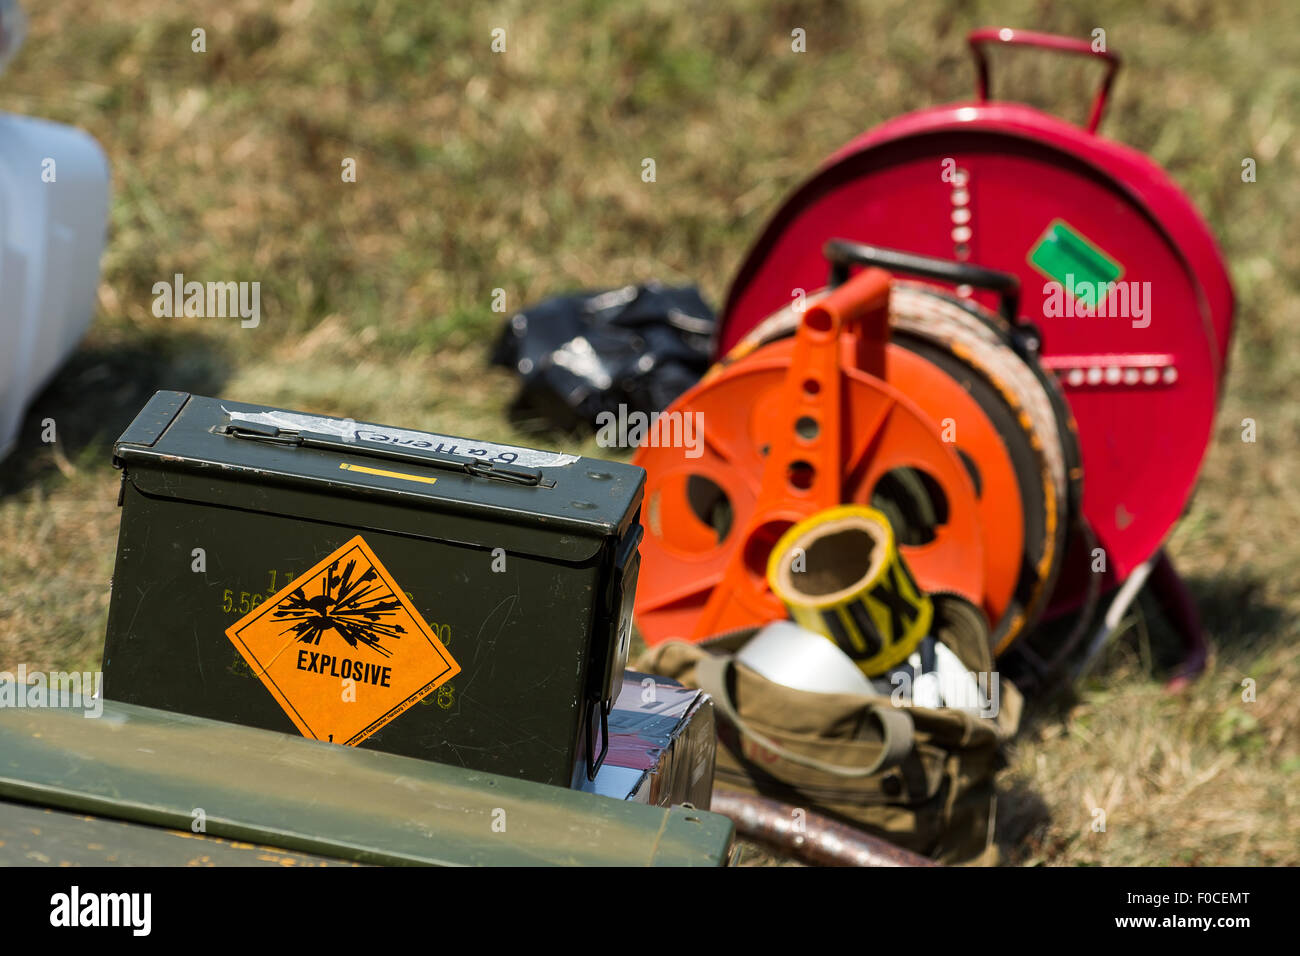 Engelmannsreuth, Germany. 12th Aug, 2015. A box reading 'Explosive' stands on a field next to items of equipment in the aftermath of a crashed plane near Engelmannsreuth, Germany, 12 August 2015. A US Air Force F-16 crashed near Engelmannsreuth, Germany, on 11 August 2015. Rescue operations are still taking place. Photo: NICOLAS ARMER/dpa/Alamy Live News Stock Photo